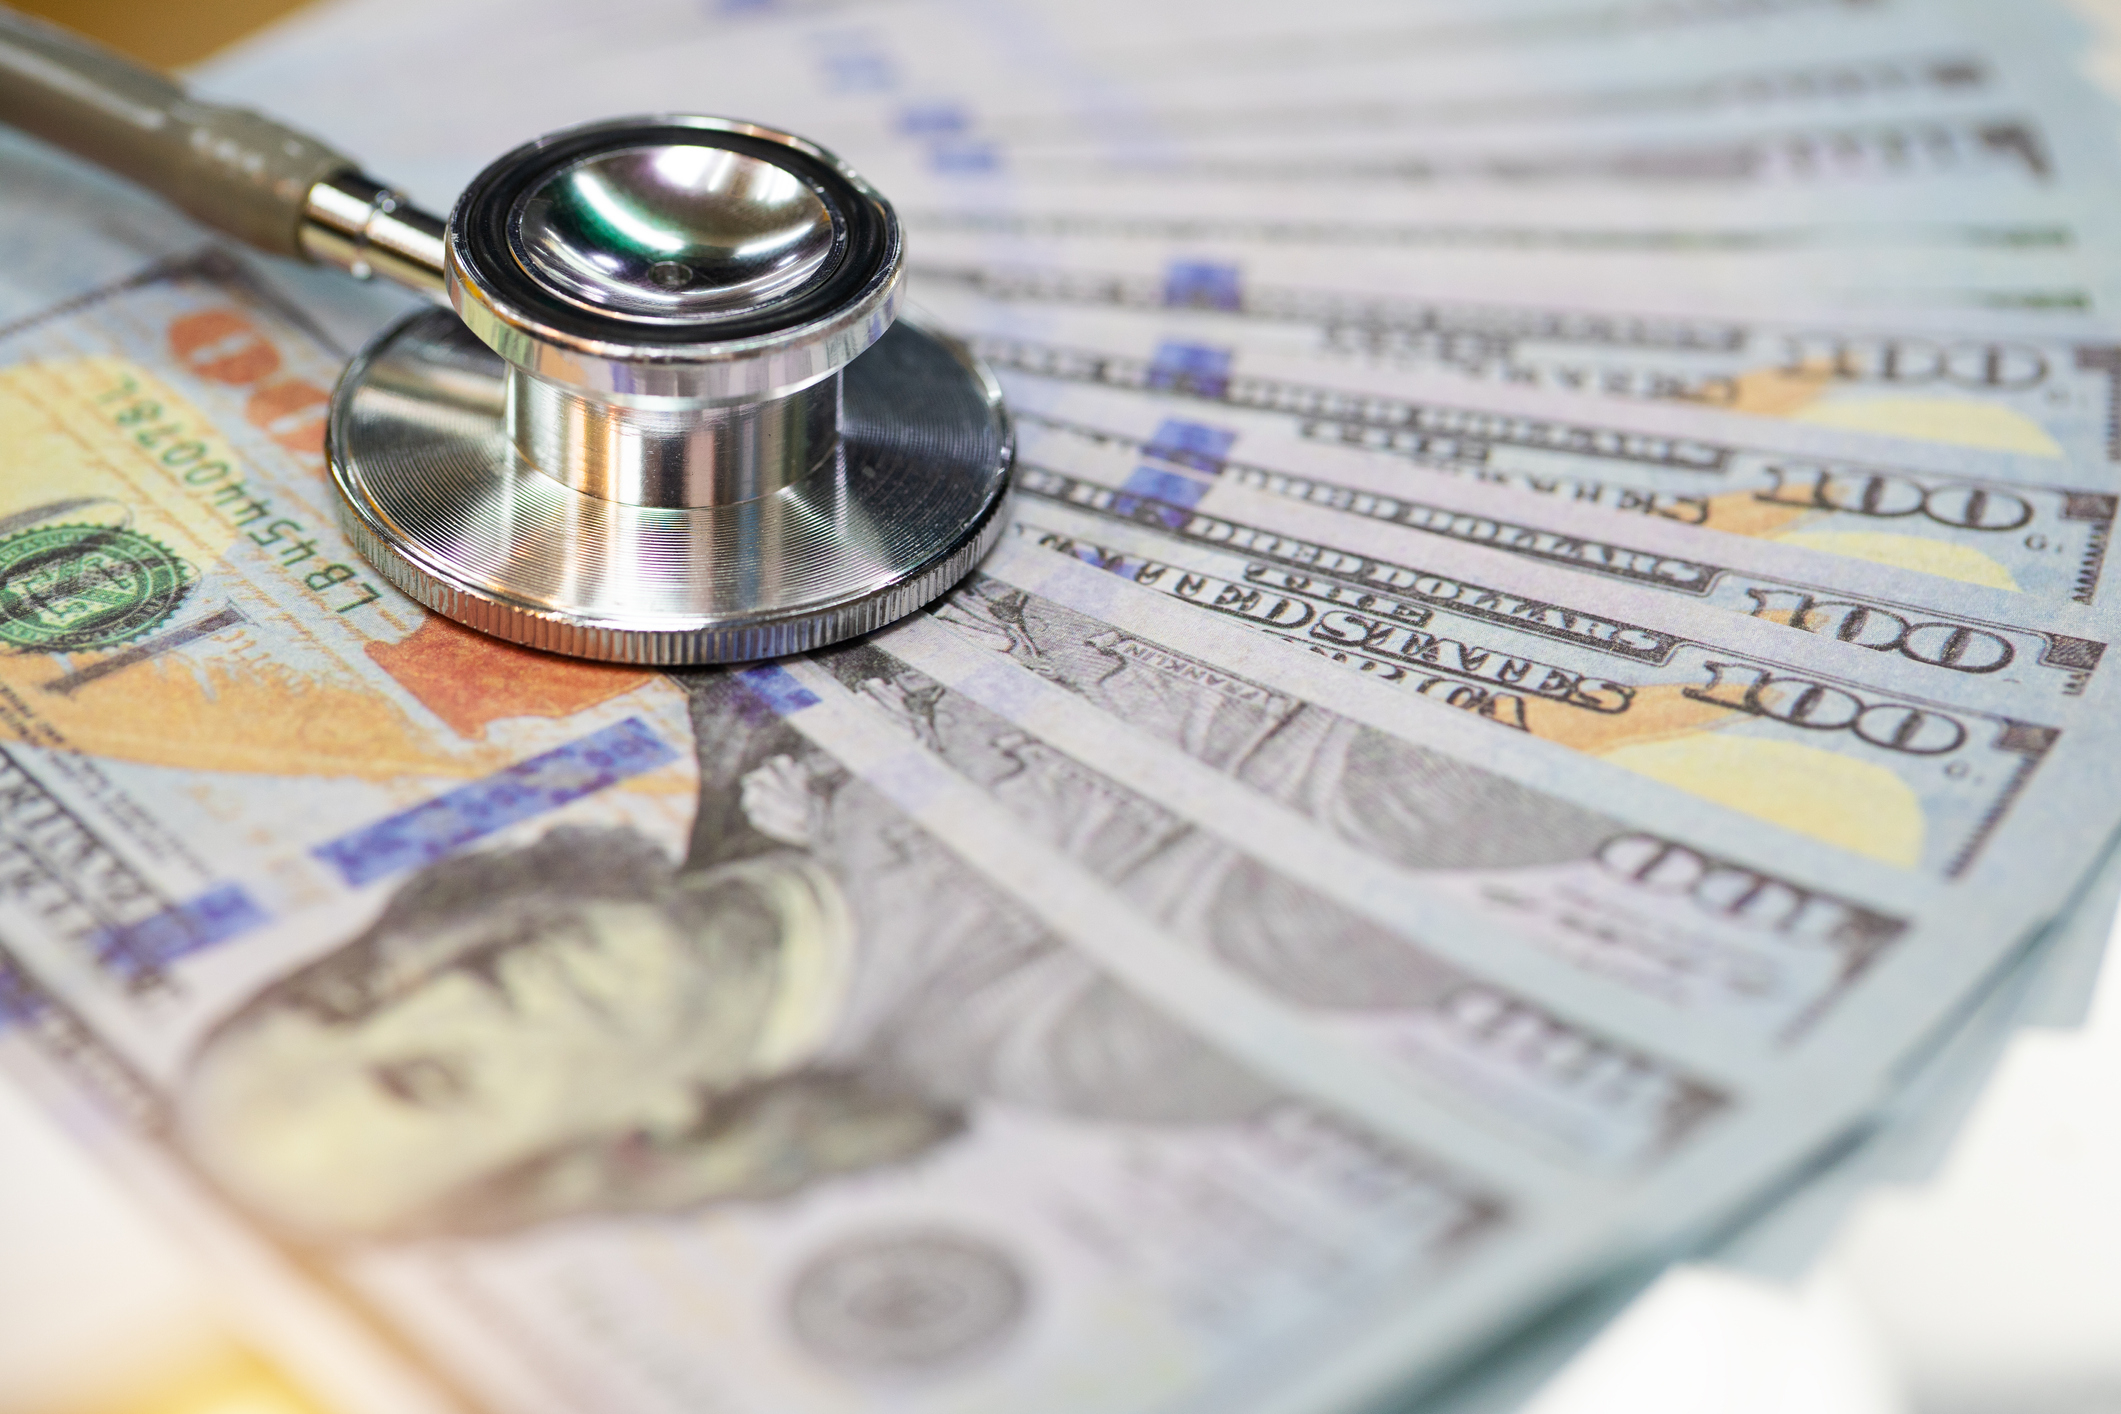 A stethoscope is lying on top of $100 bills